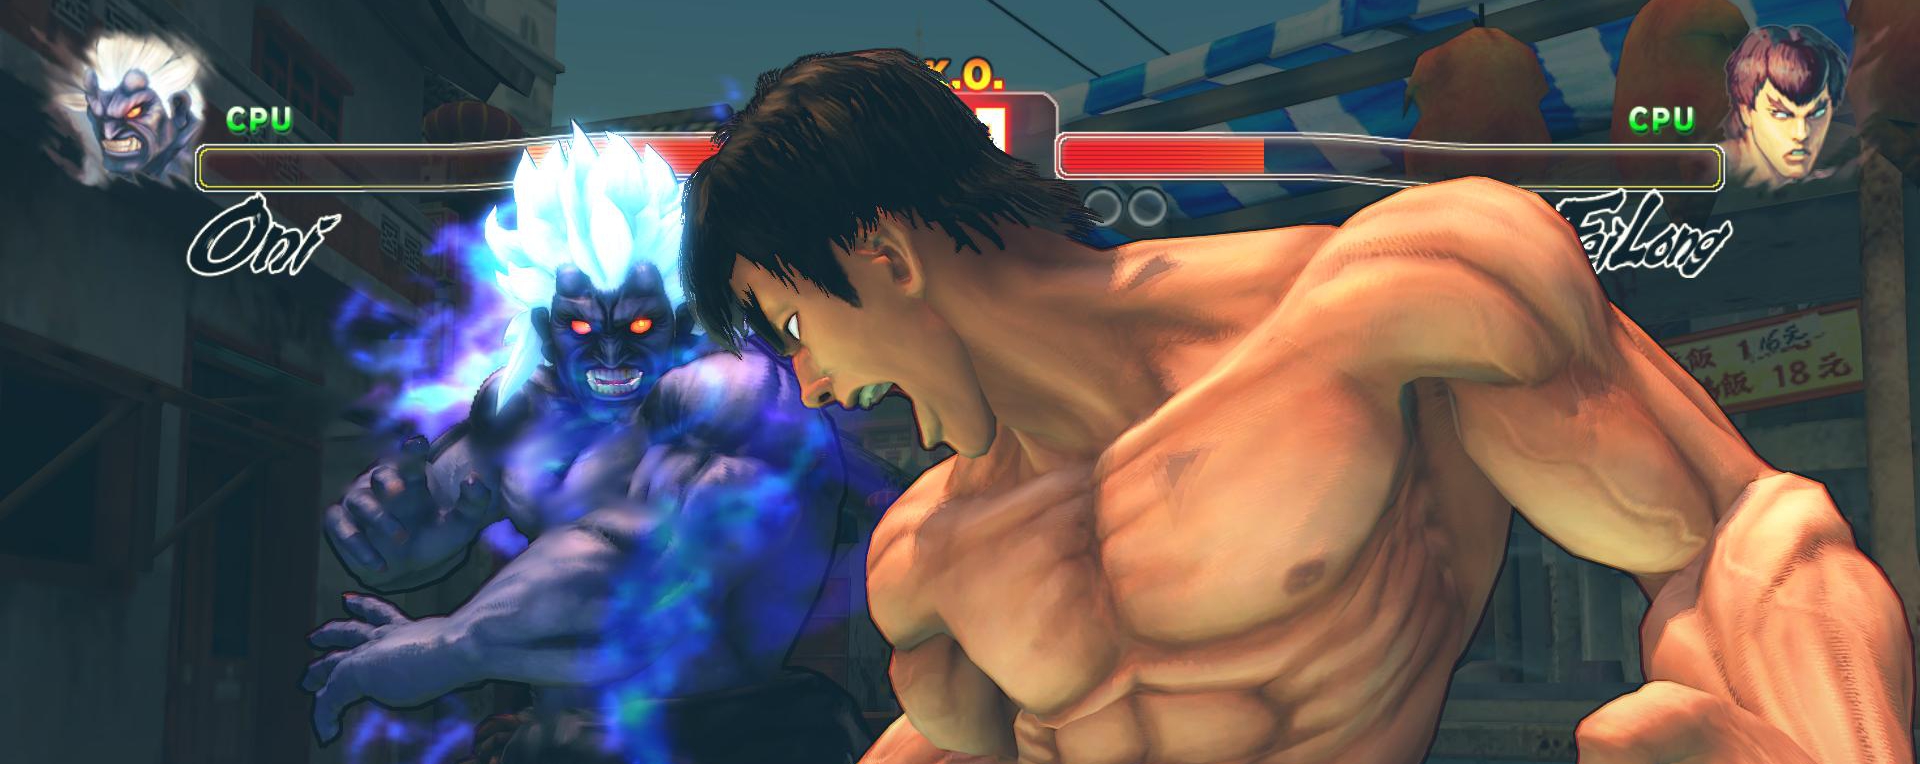 Super Street Fighter IV: Arcade Edition review